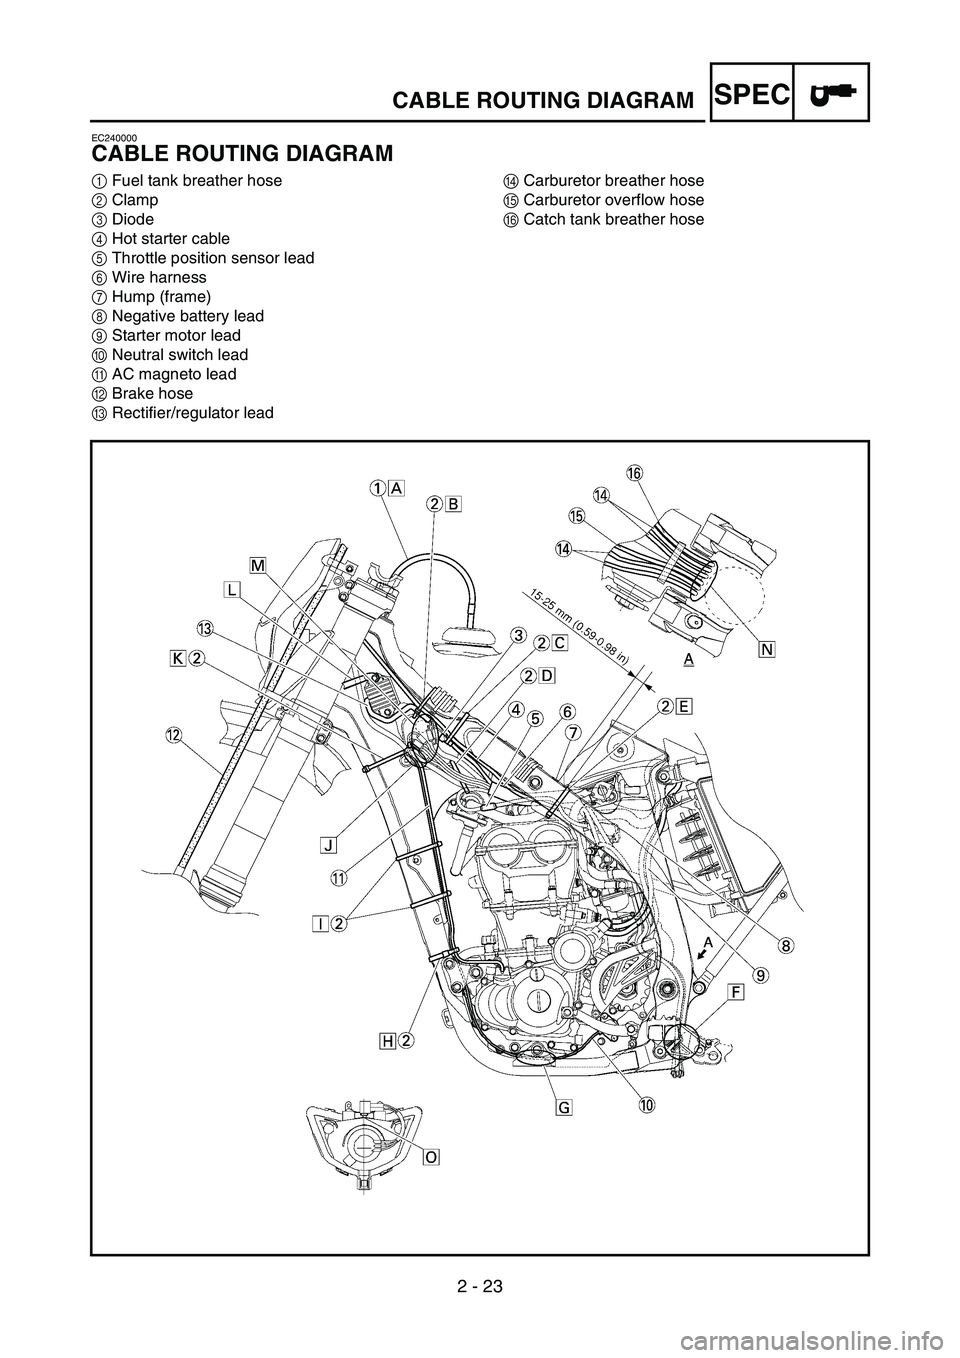 YAMAHA WR 450F 2007  Owners Manual 2 - 23
SPECCABLE ROUTING DIAGRAM
EC240000
CABLE ROUTING DIAGRAM
1Fuel tank breather hose
2Clamp
3Diode
4Hot starter cable
5Throttle position sensor lead
6Wire harness
7Hump (frame)
8Negative battery l